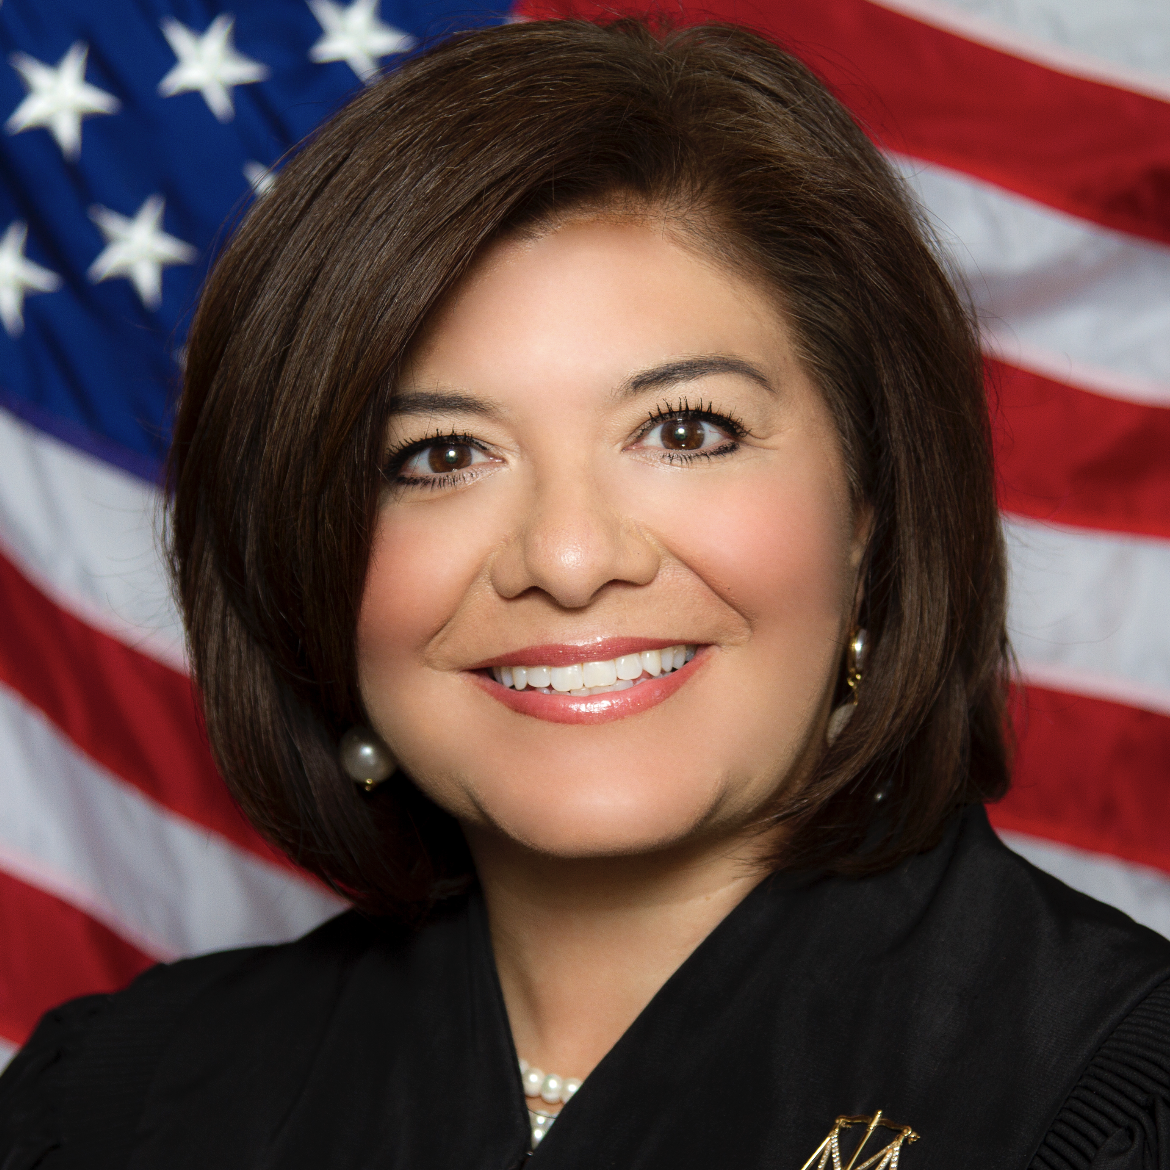 Picture of Lori I. Valenzuela, Candidate for Justice, 4th Court of Appeals District, Place 7